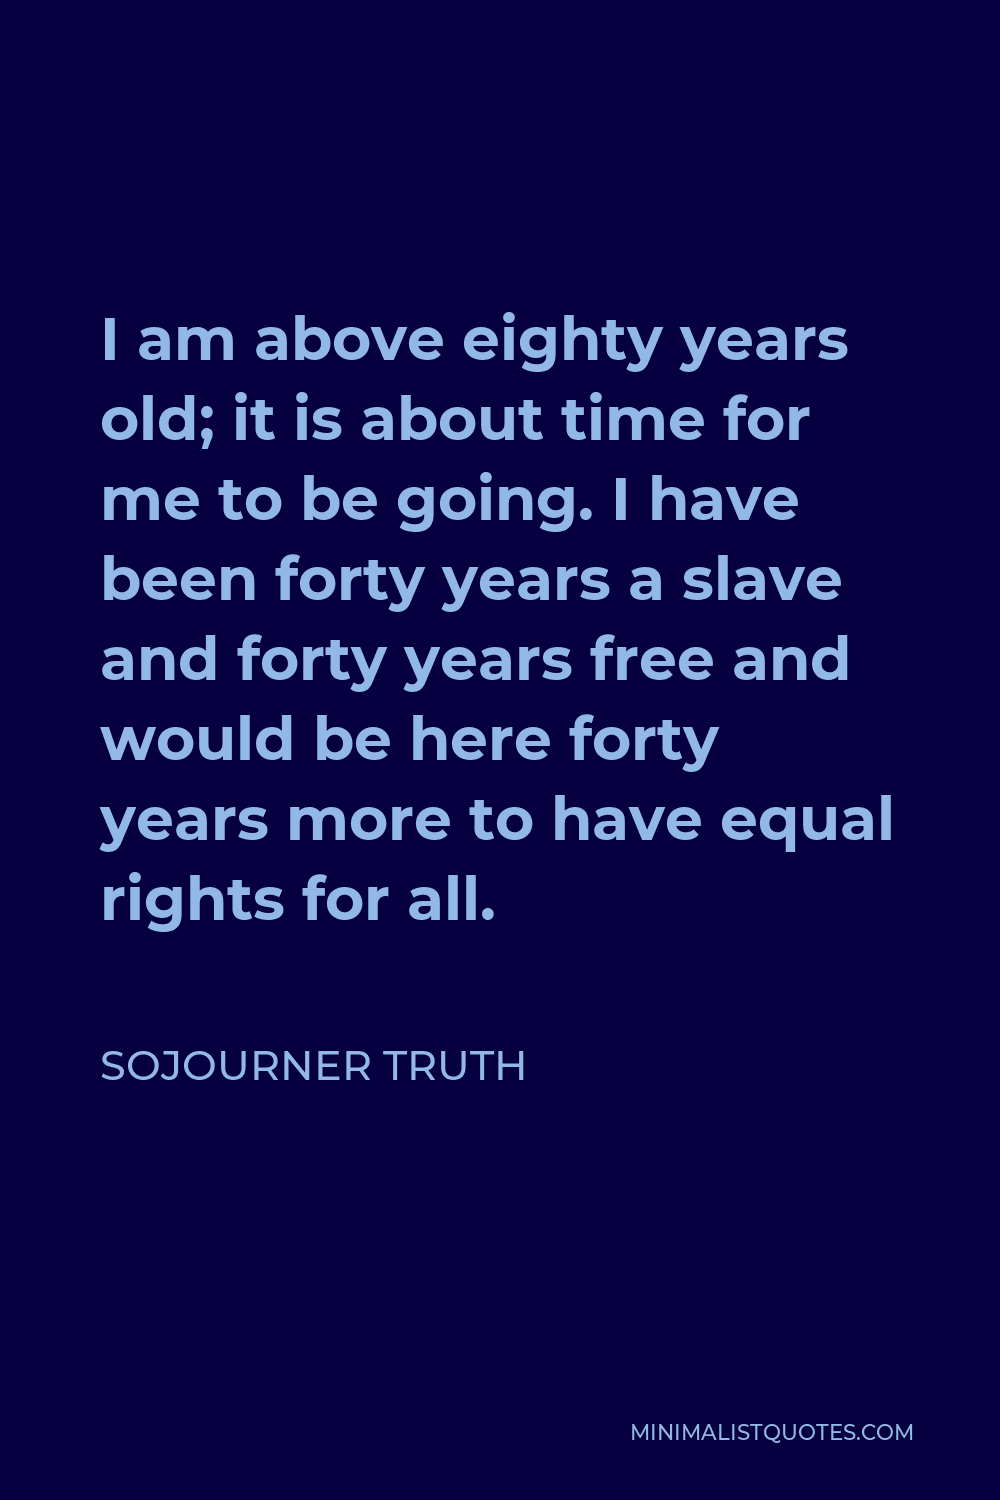 Sojourner Truth Quote - I am above eighty years old; it is about time for me to be going. I have been forty years a slave and forty years free and would be here forty years more to have equal rights for all.